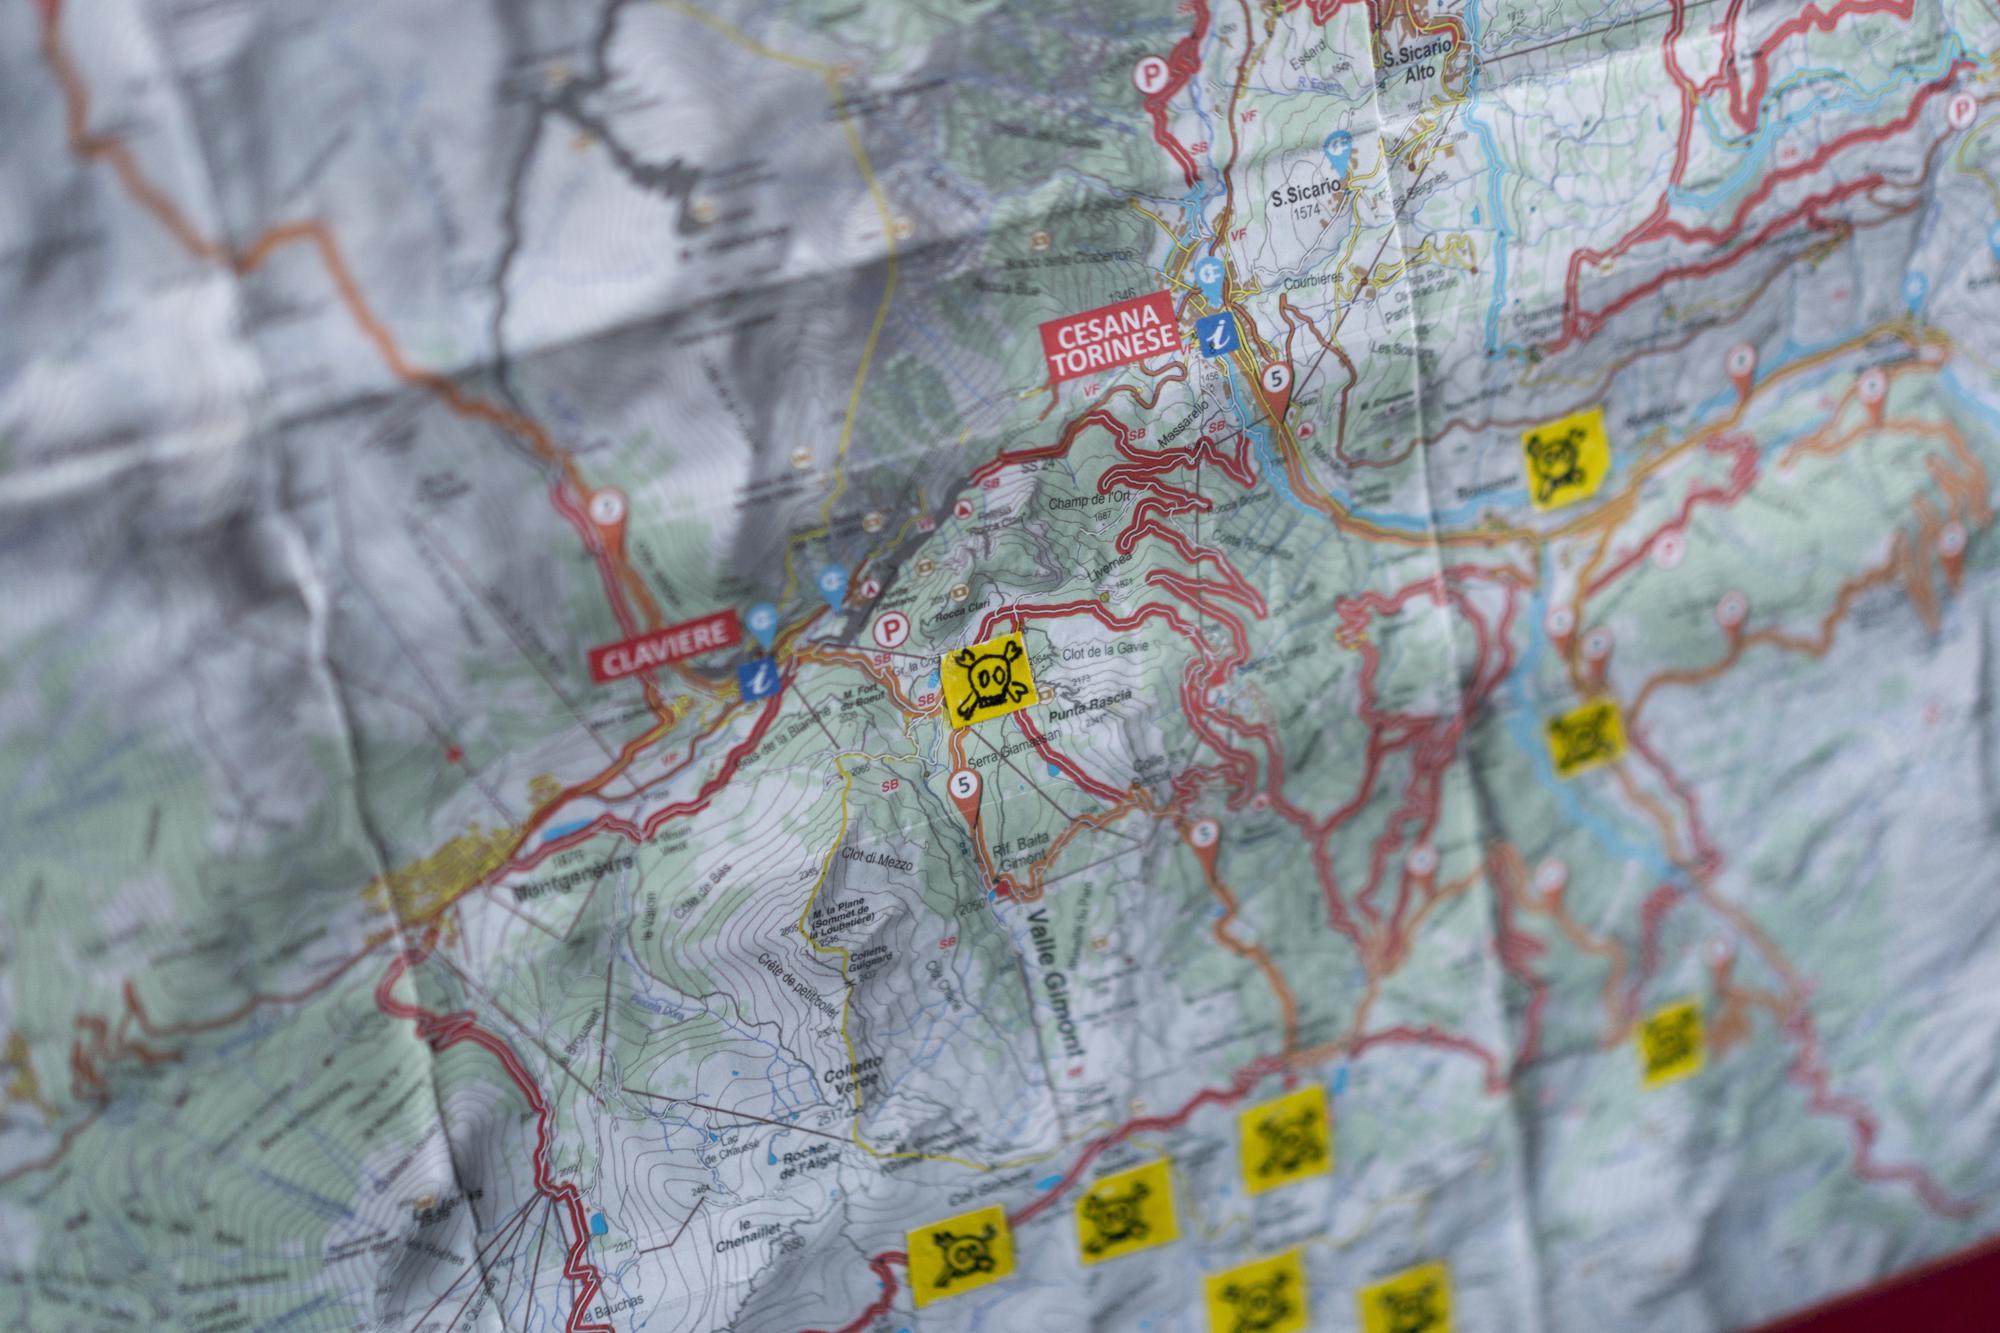 A map indicating dangerous routes for migrants traveling on foot is pictured at a migrant refuge in Oulx, Italy, Saturday, Dec. 11, 2021. (AP Photo/Daniel Cole)